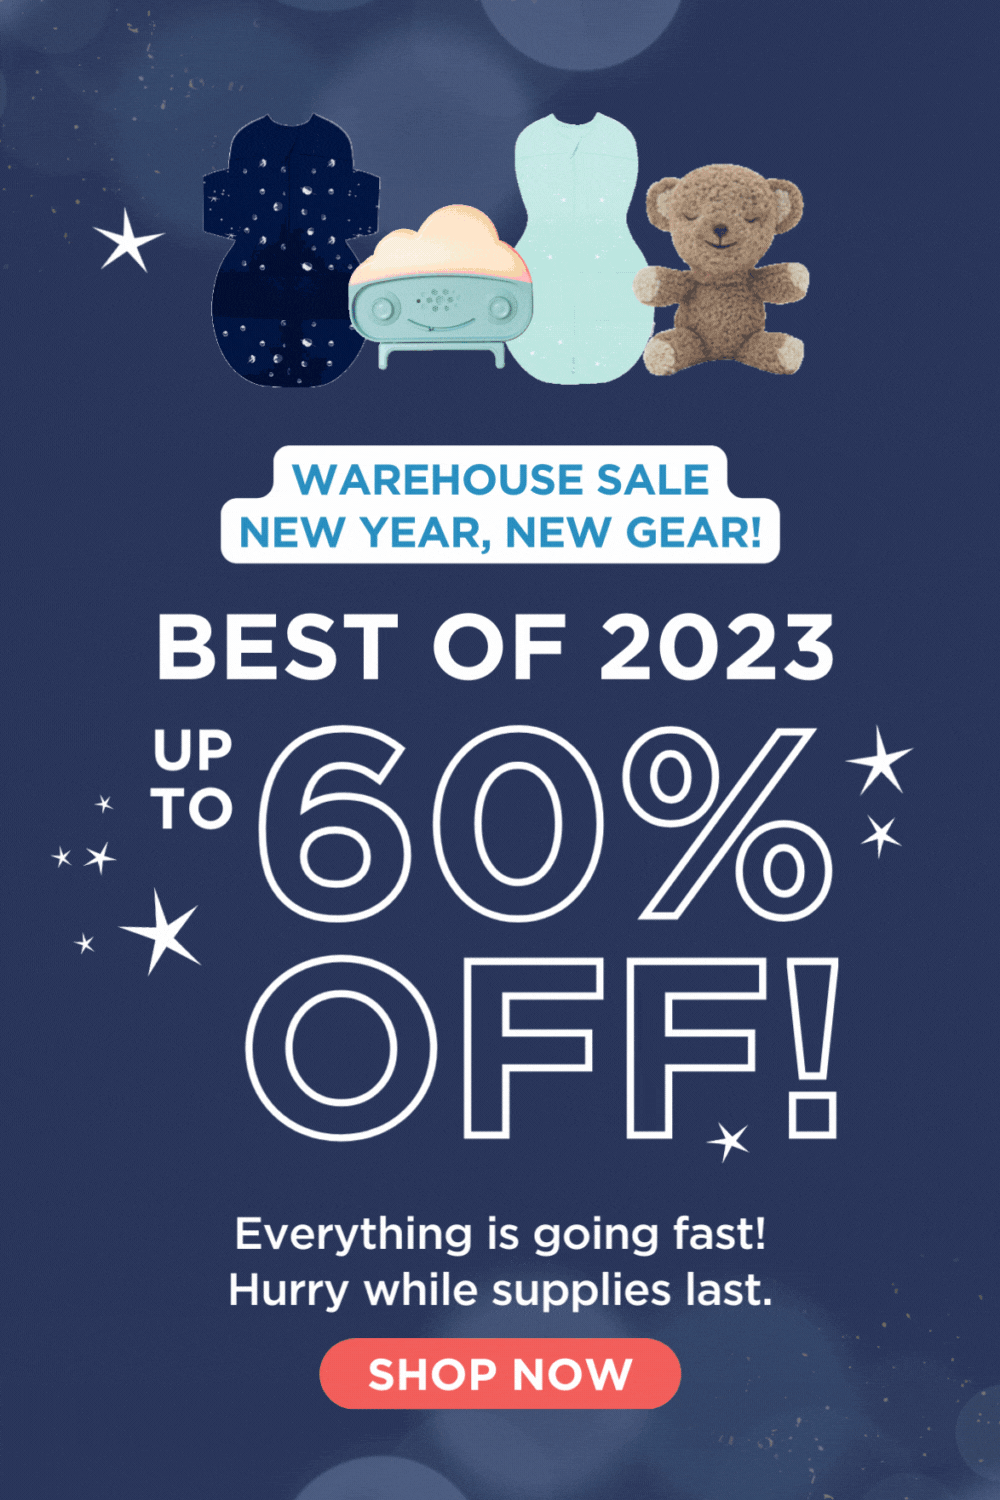 WAREHOUSE SALE NEW YEAR, NEW GEAR! BEST OF 2023 UP TO 60% OFF! Everything is going fast! Hurry while supplies last. SHOP NOW